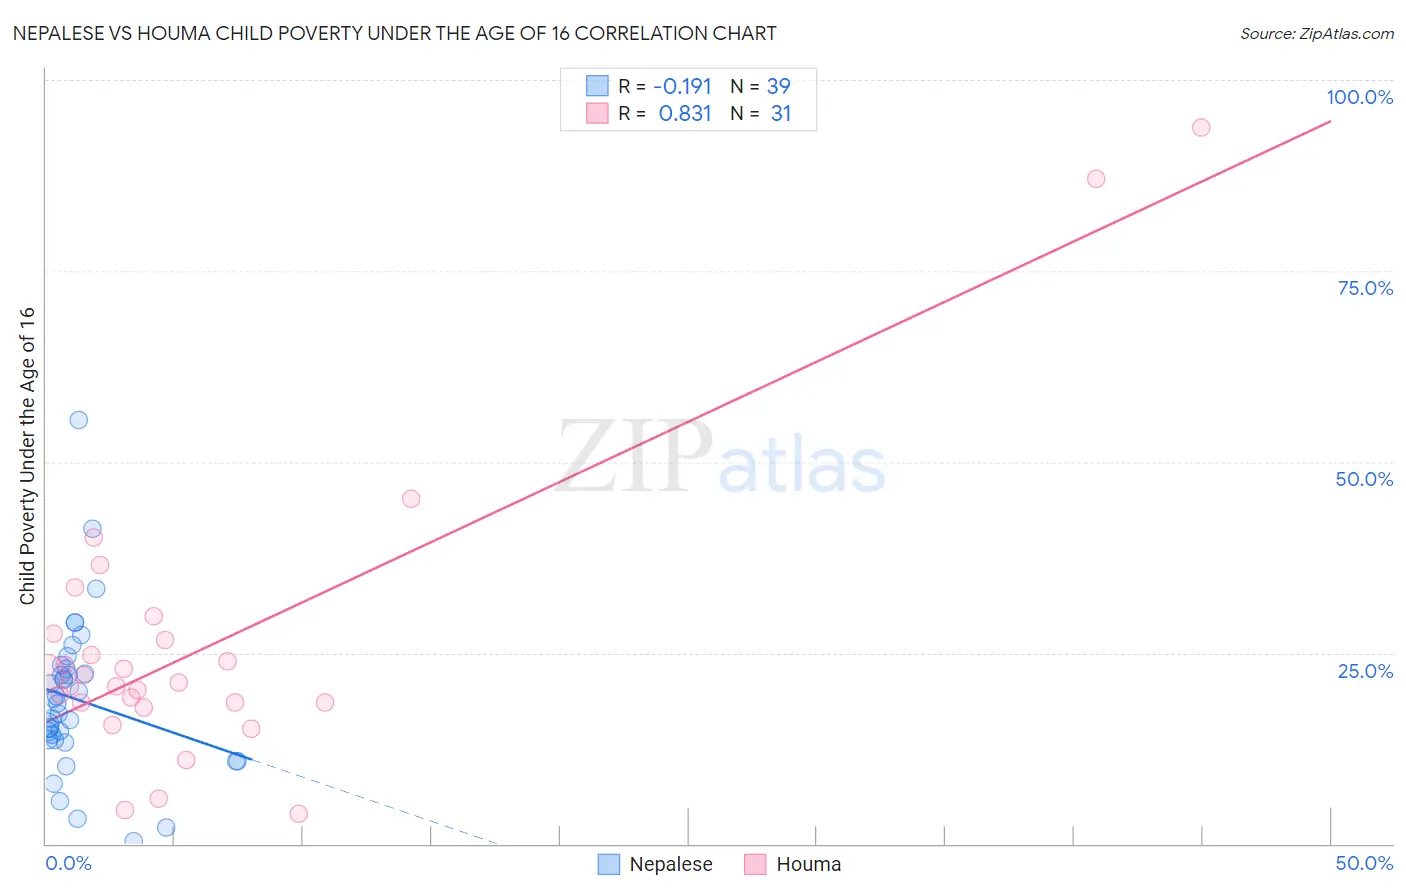 Nepalese vs Houma Child Poverty Under the Age of 16